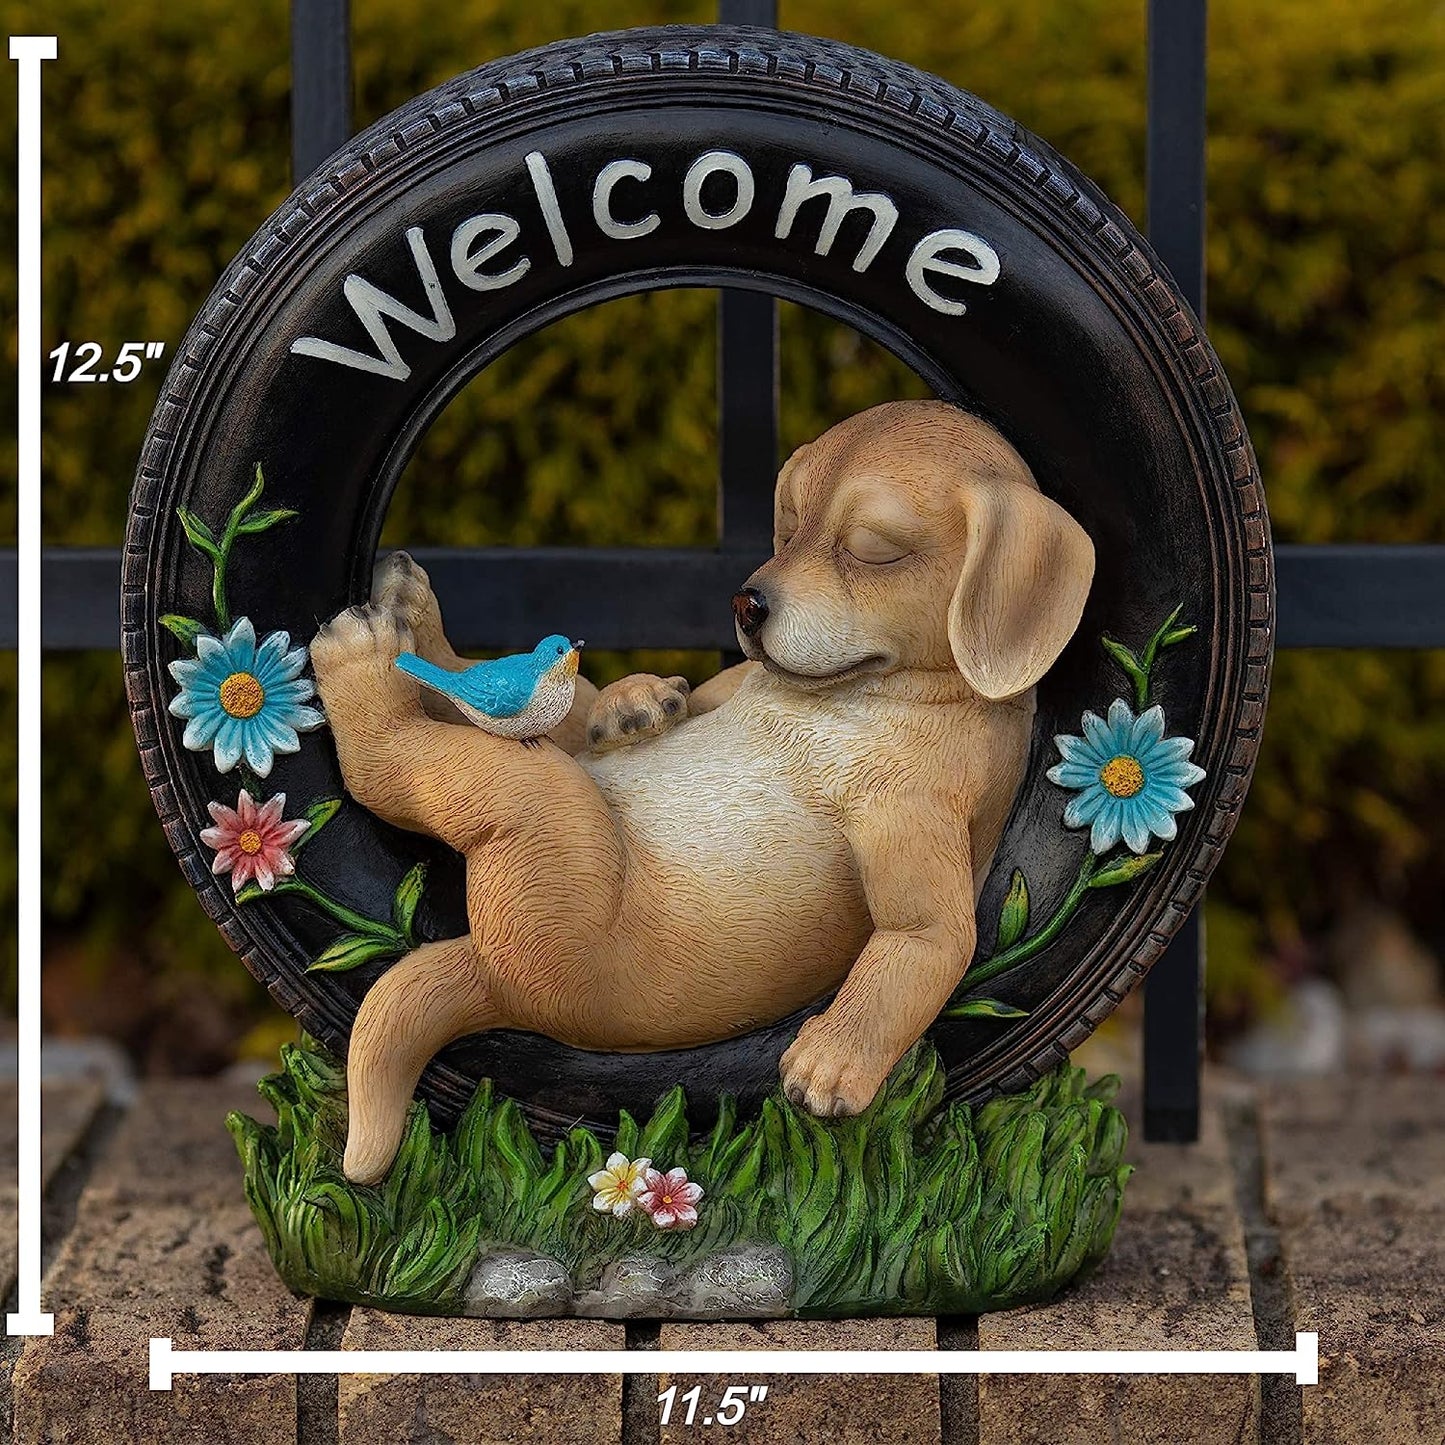 Welcome Puppy Dog Solar Powered LED Outdoor Decor Garden Light Outdoor Decor Garden Light Welcome Chillax Puppy Statues Outdoor Funny Figurine Decor for Outside Patio, Yard, Lawn